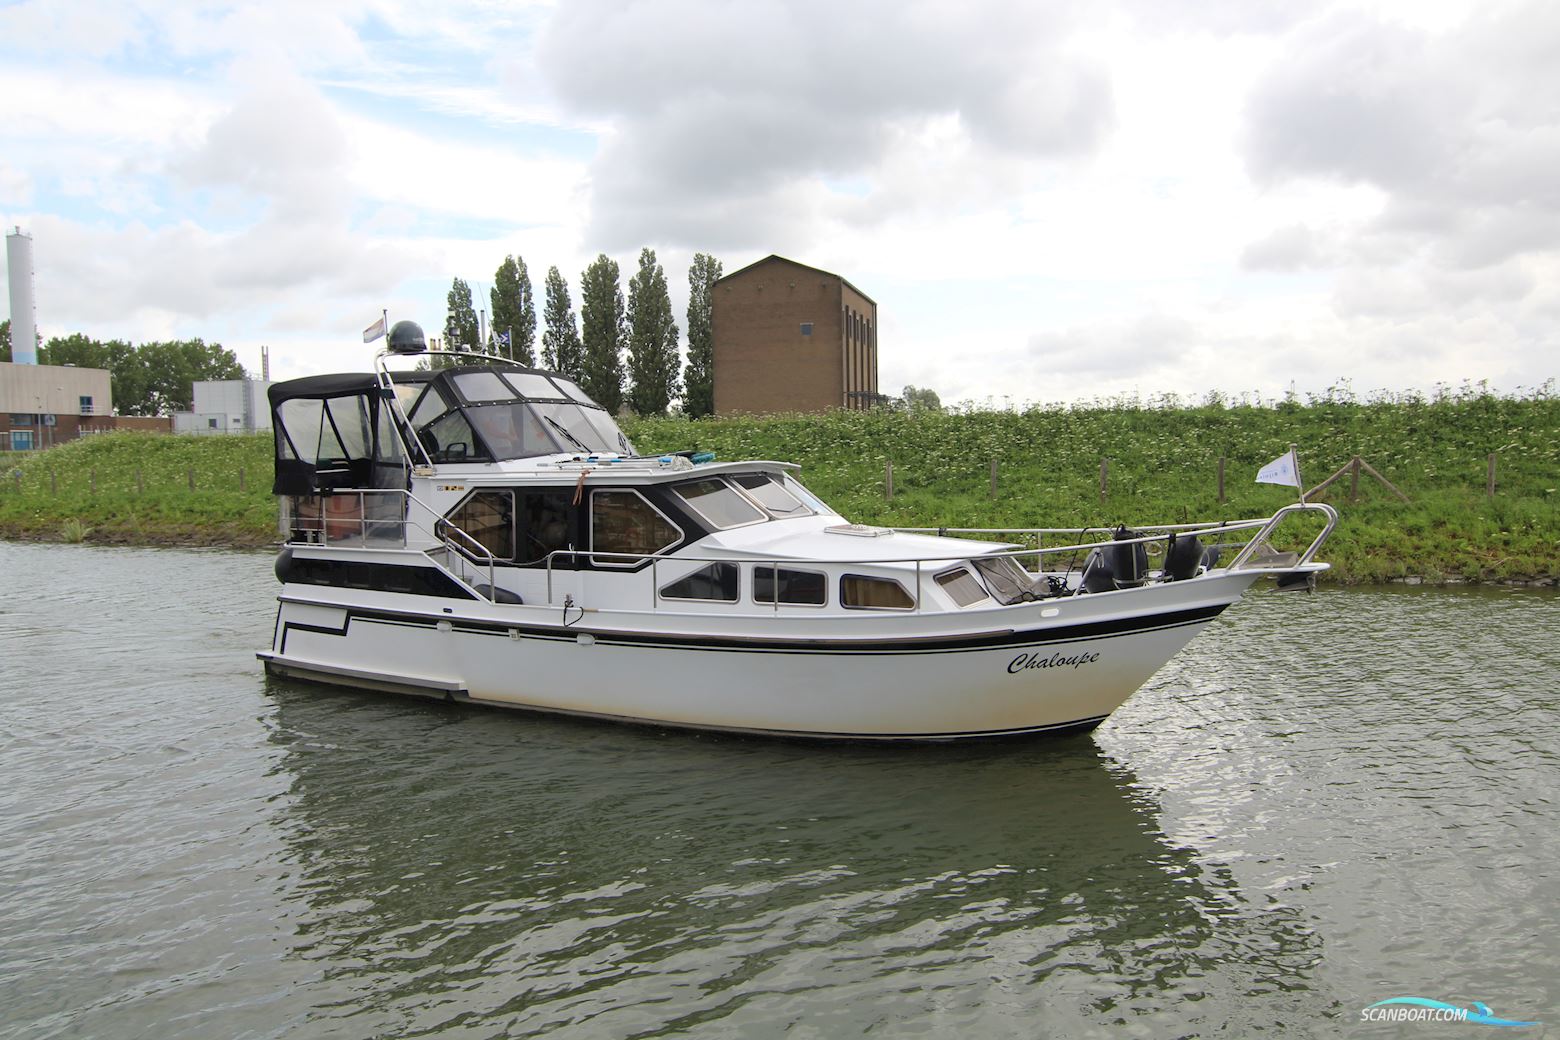 Gruno 38 S Motor boat 1994, with Ford engine, The Netherlands